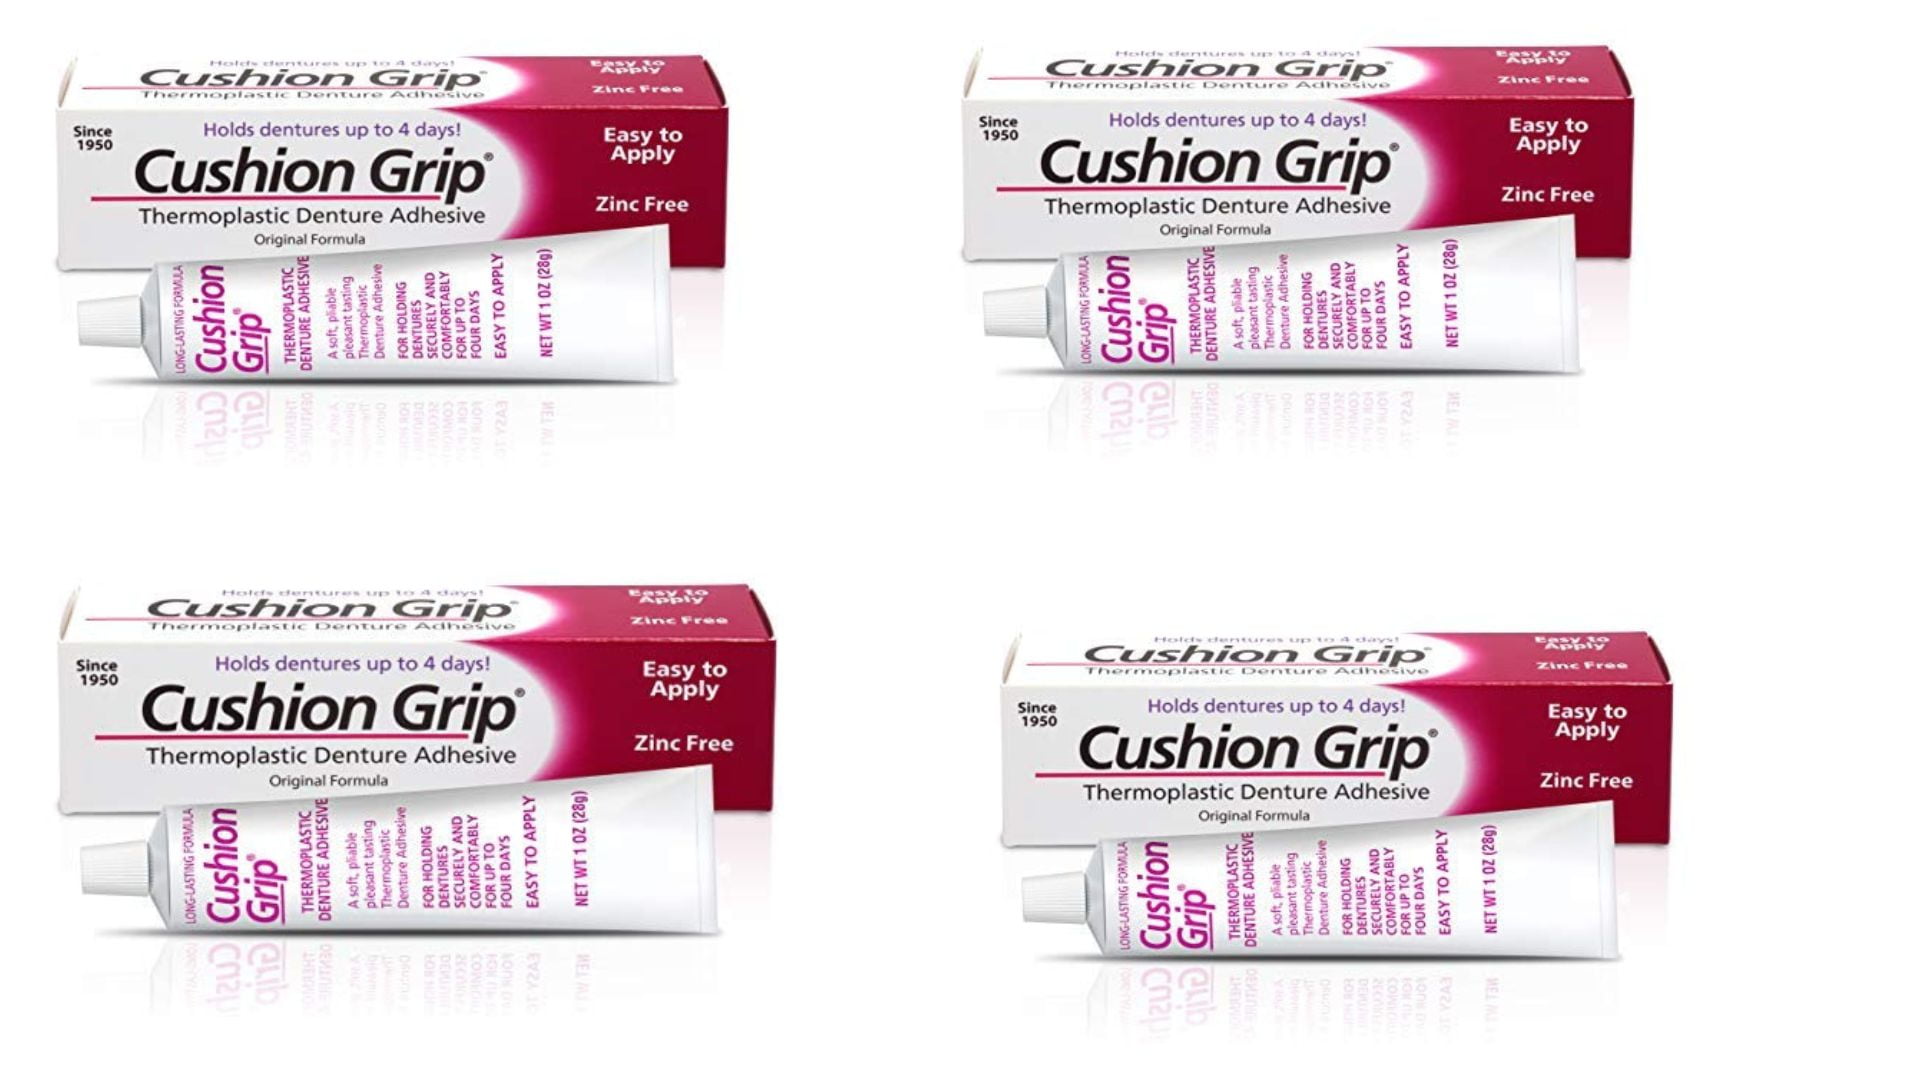 Cushion Grip Thermoplastic Denture Adhesive, 1 oz (Pack of 2) - Refit and  Tighten Loose and Uncomfortable Denture [Not A Glue Adhesive, Acts Like A  Soft Reline for Denture] 